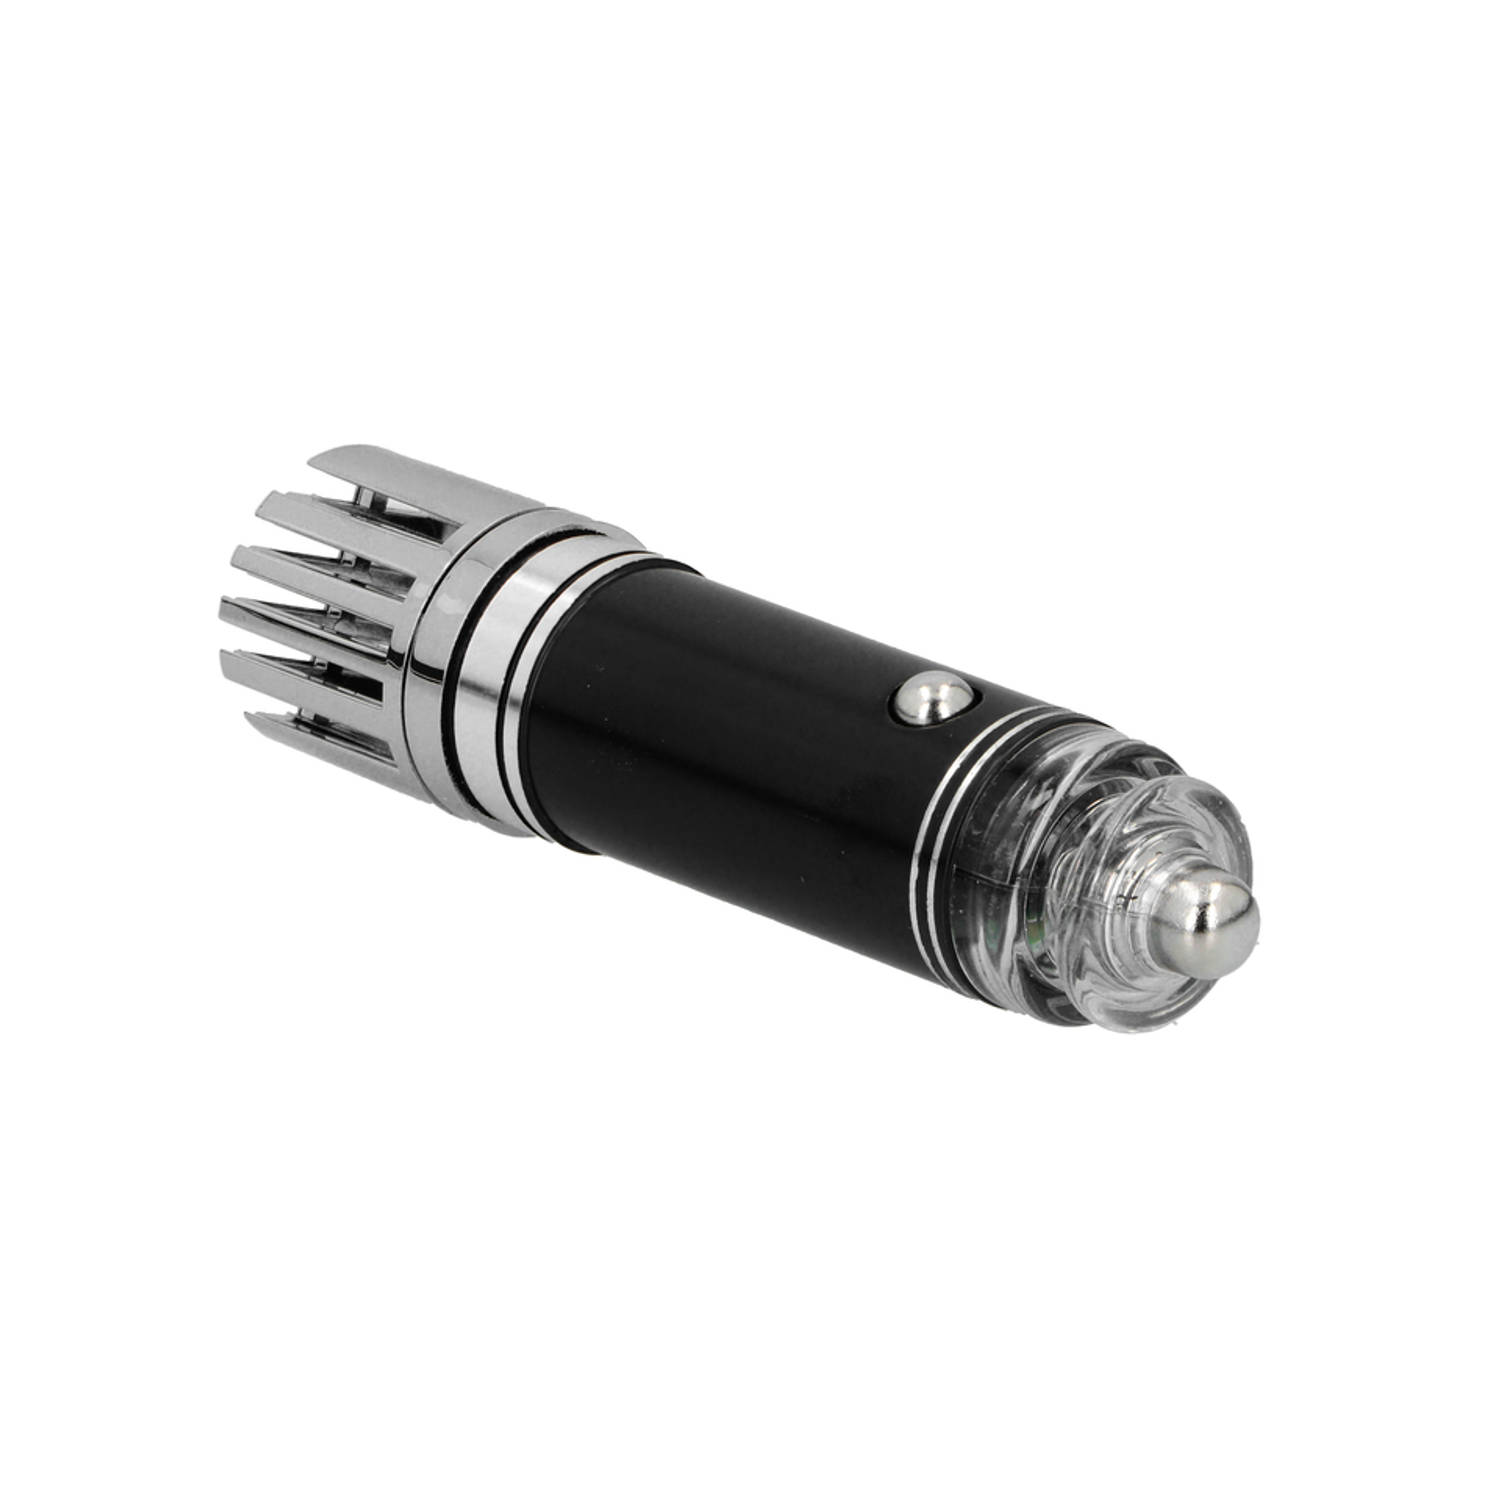 All Ride Luchtreiniger Auto - 12V Aansluiting - Met Led